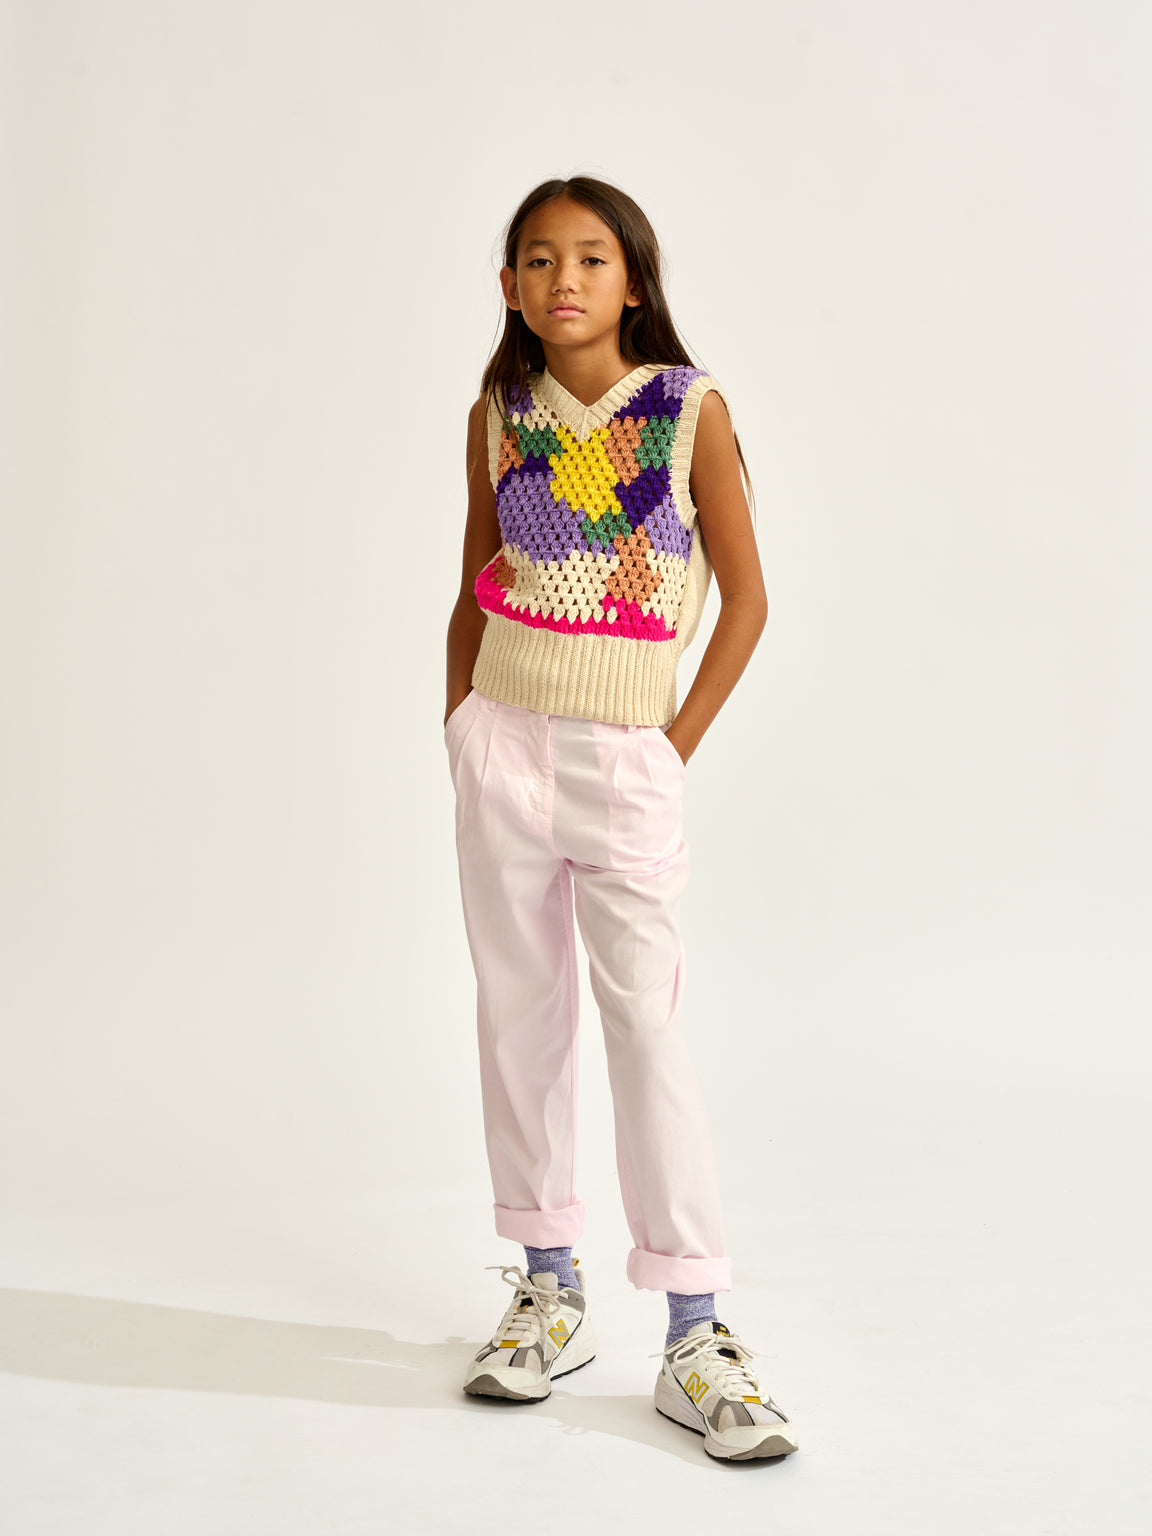 Marage Knitted Top - Multicolor | Girls Collection | Bellerose